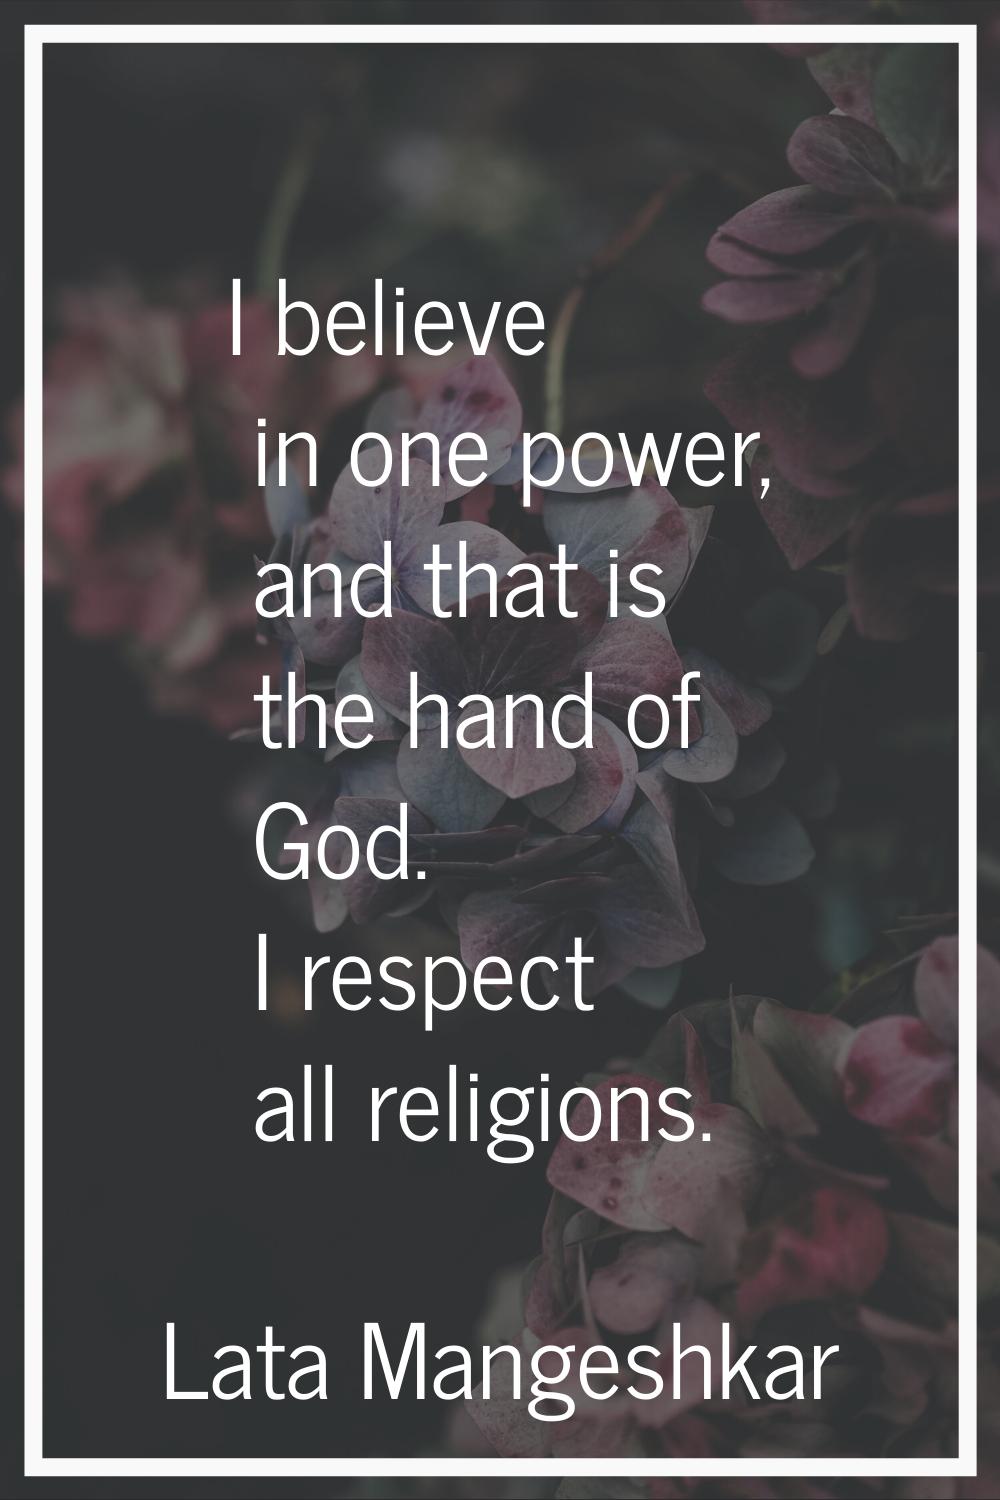 I believe in one power, and that is the hand of God. I respect all religions.